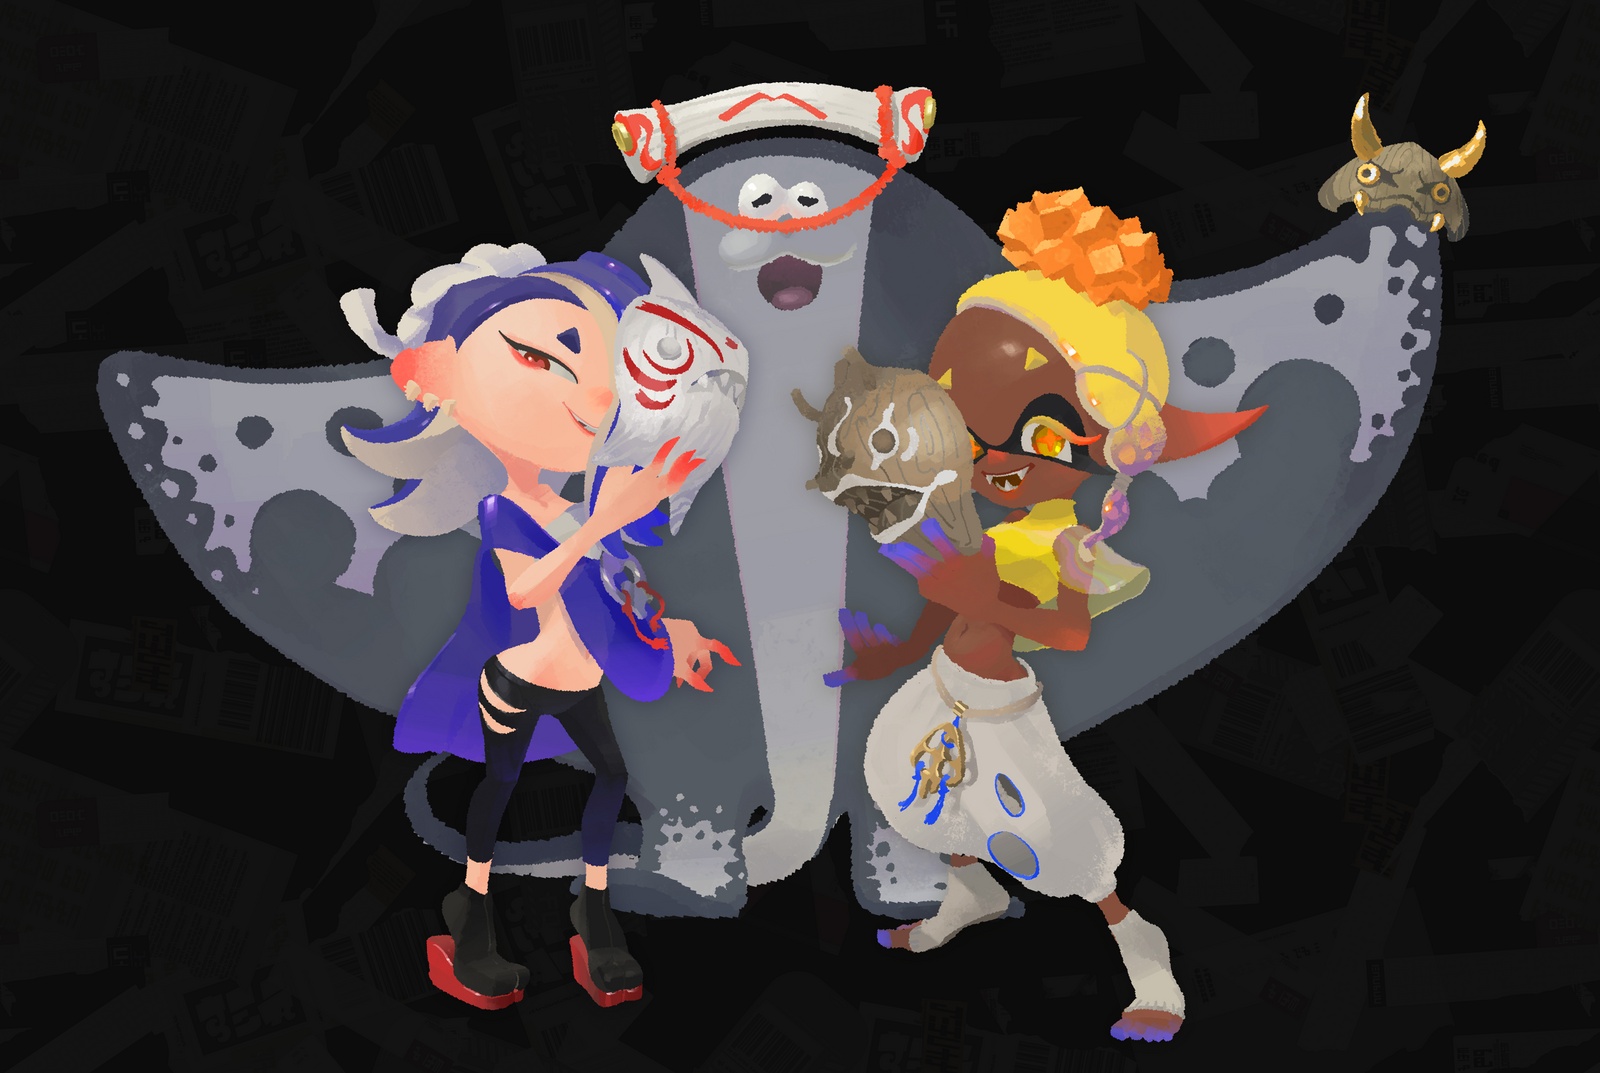 An illustration of Deep Cut. Shiver is on the left, in their typical splatsville attire. They are holding a white mask made of wood, reminiscent of a shark. Big Man stands in the middle. He is also holding a wooden mask, but his looks like a manta ray. Frye stands on the far right, holding a wooden mask which looks like an eel.